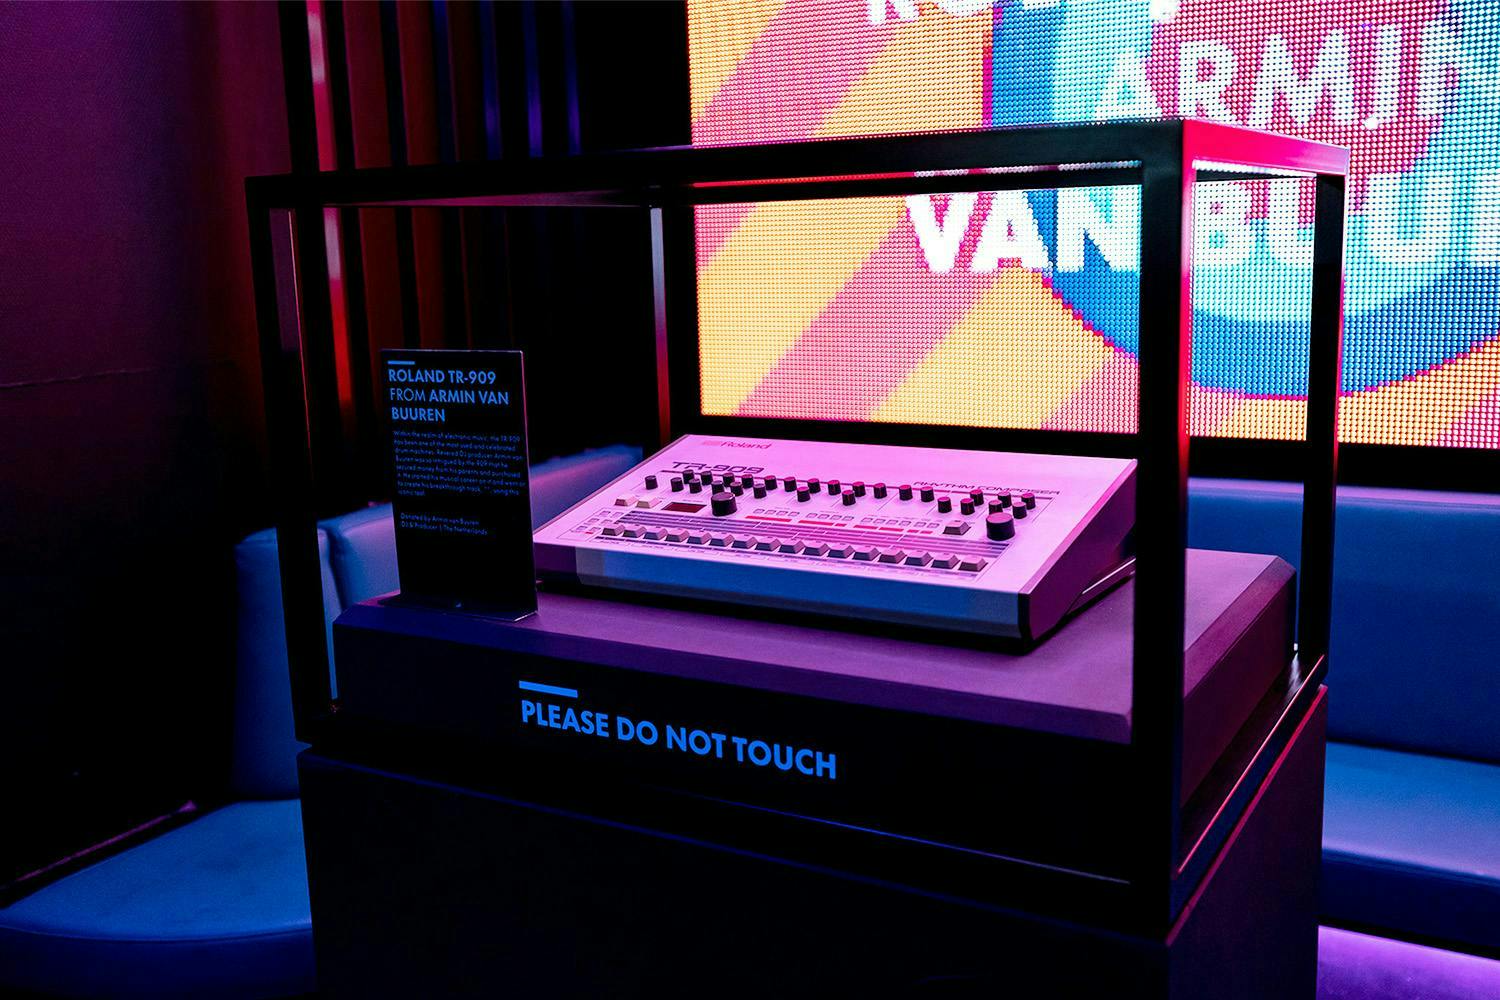 Exhibition about electronic music history